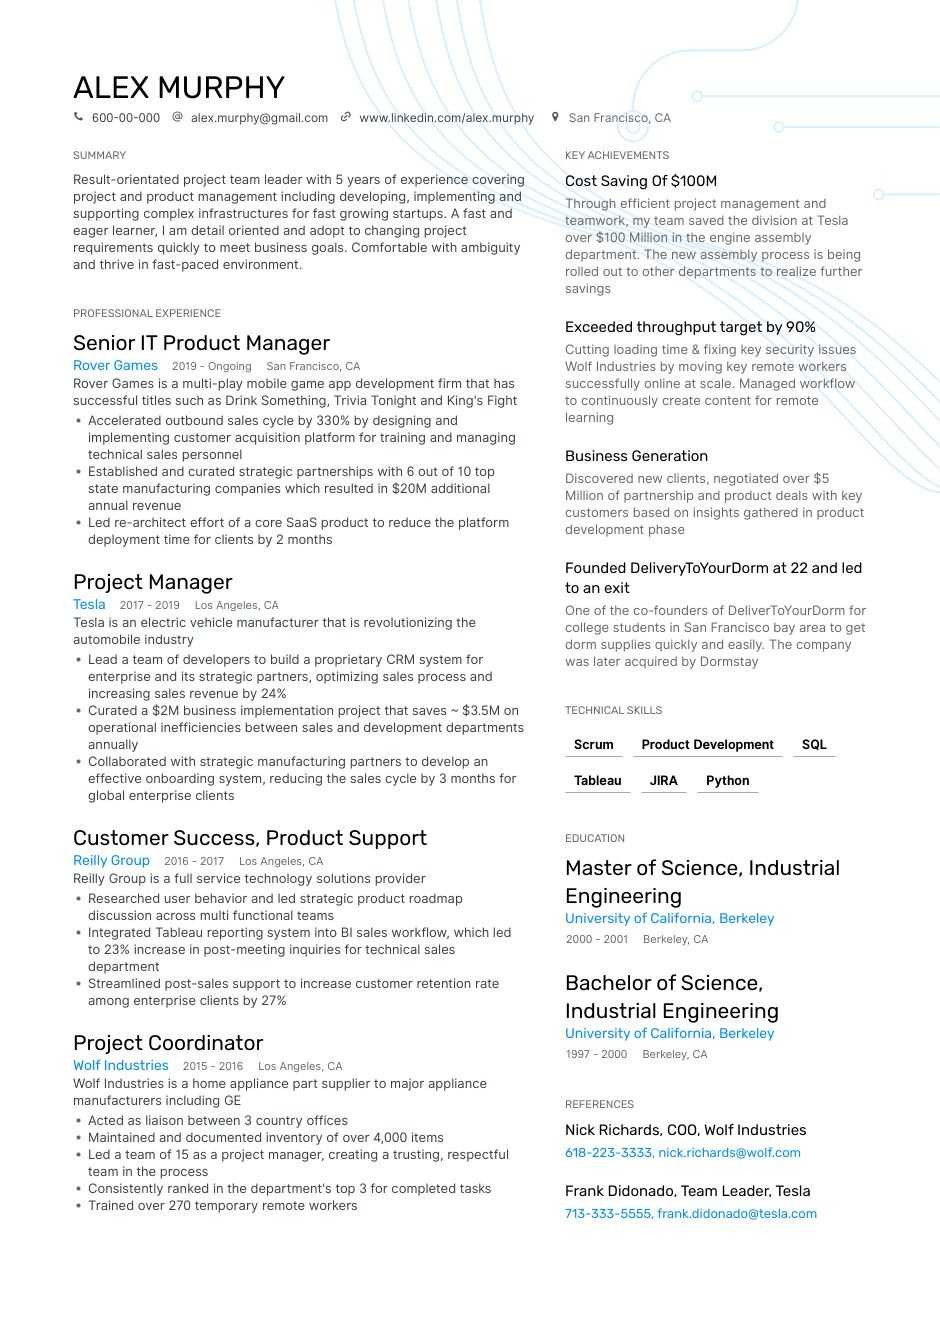 New Product Development Manager Resume Sample Product Manager Resume Examples & Guide for 2021